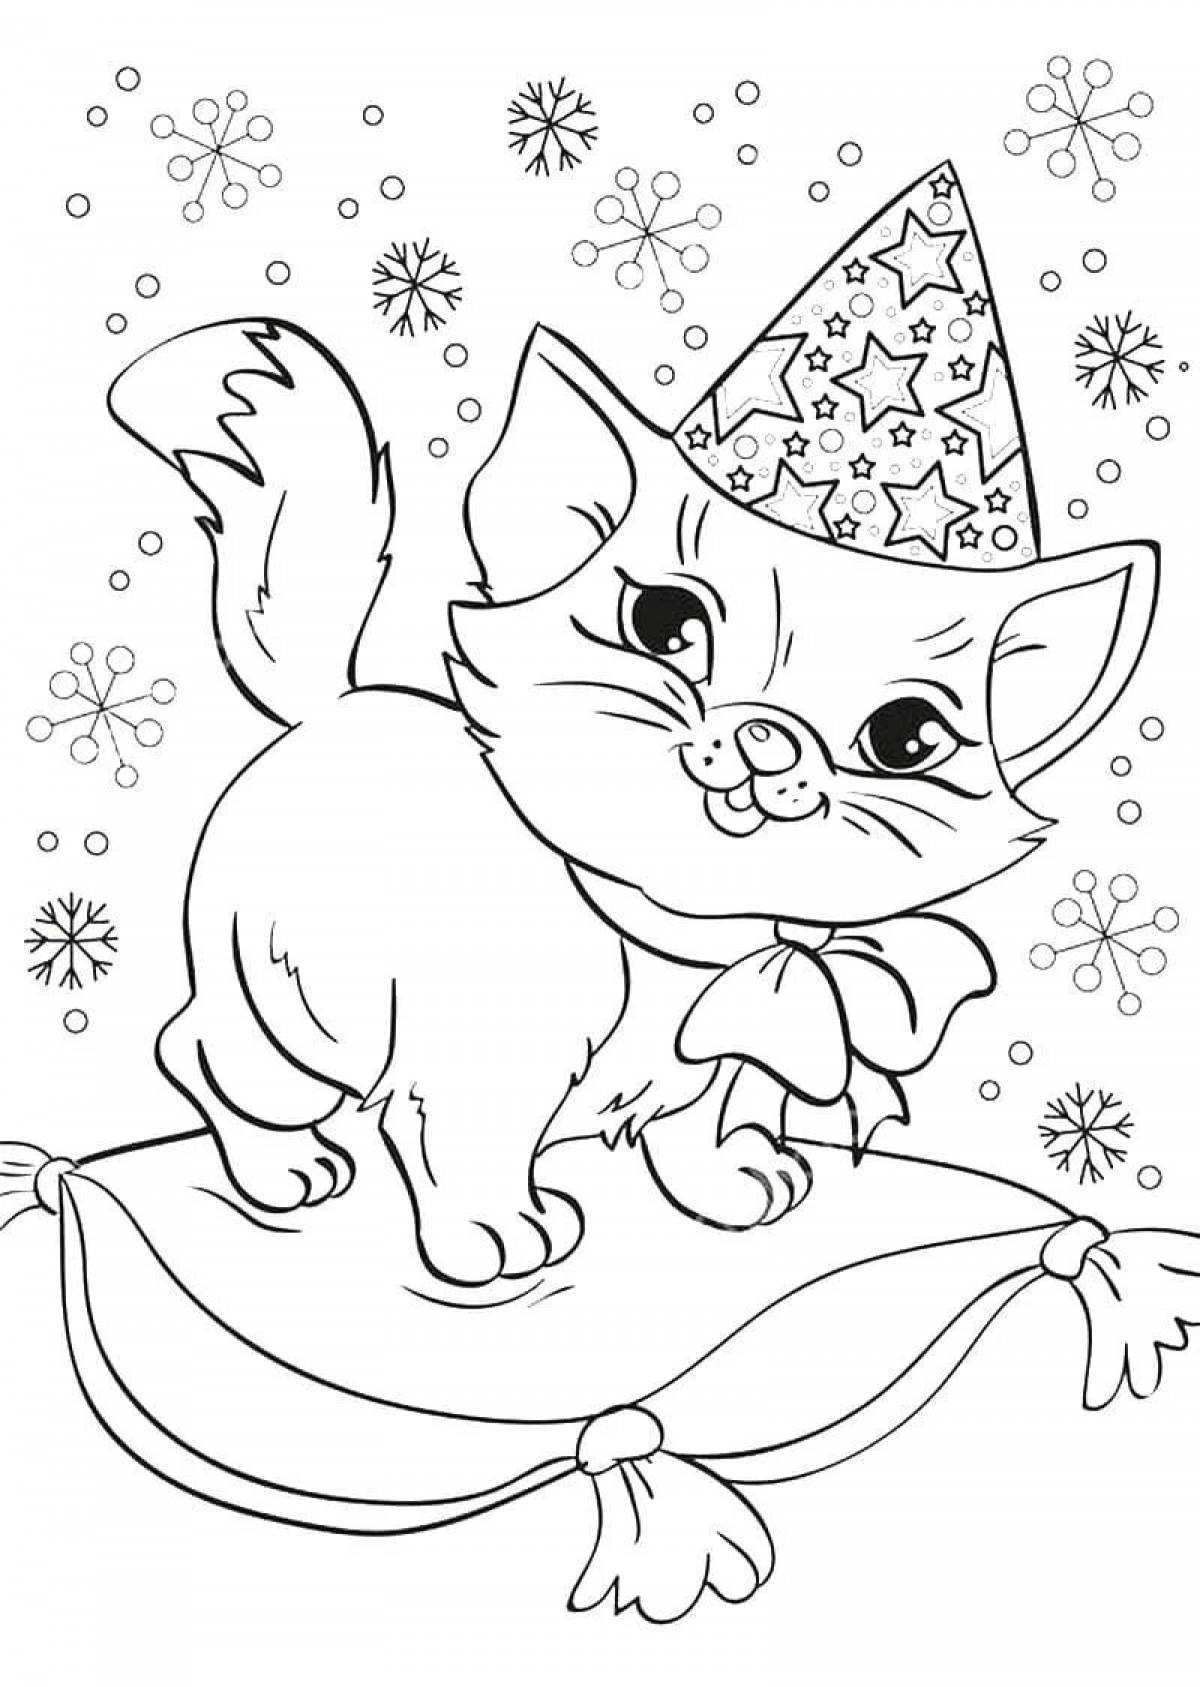 Coloring book decorated cat for the new year